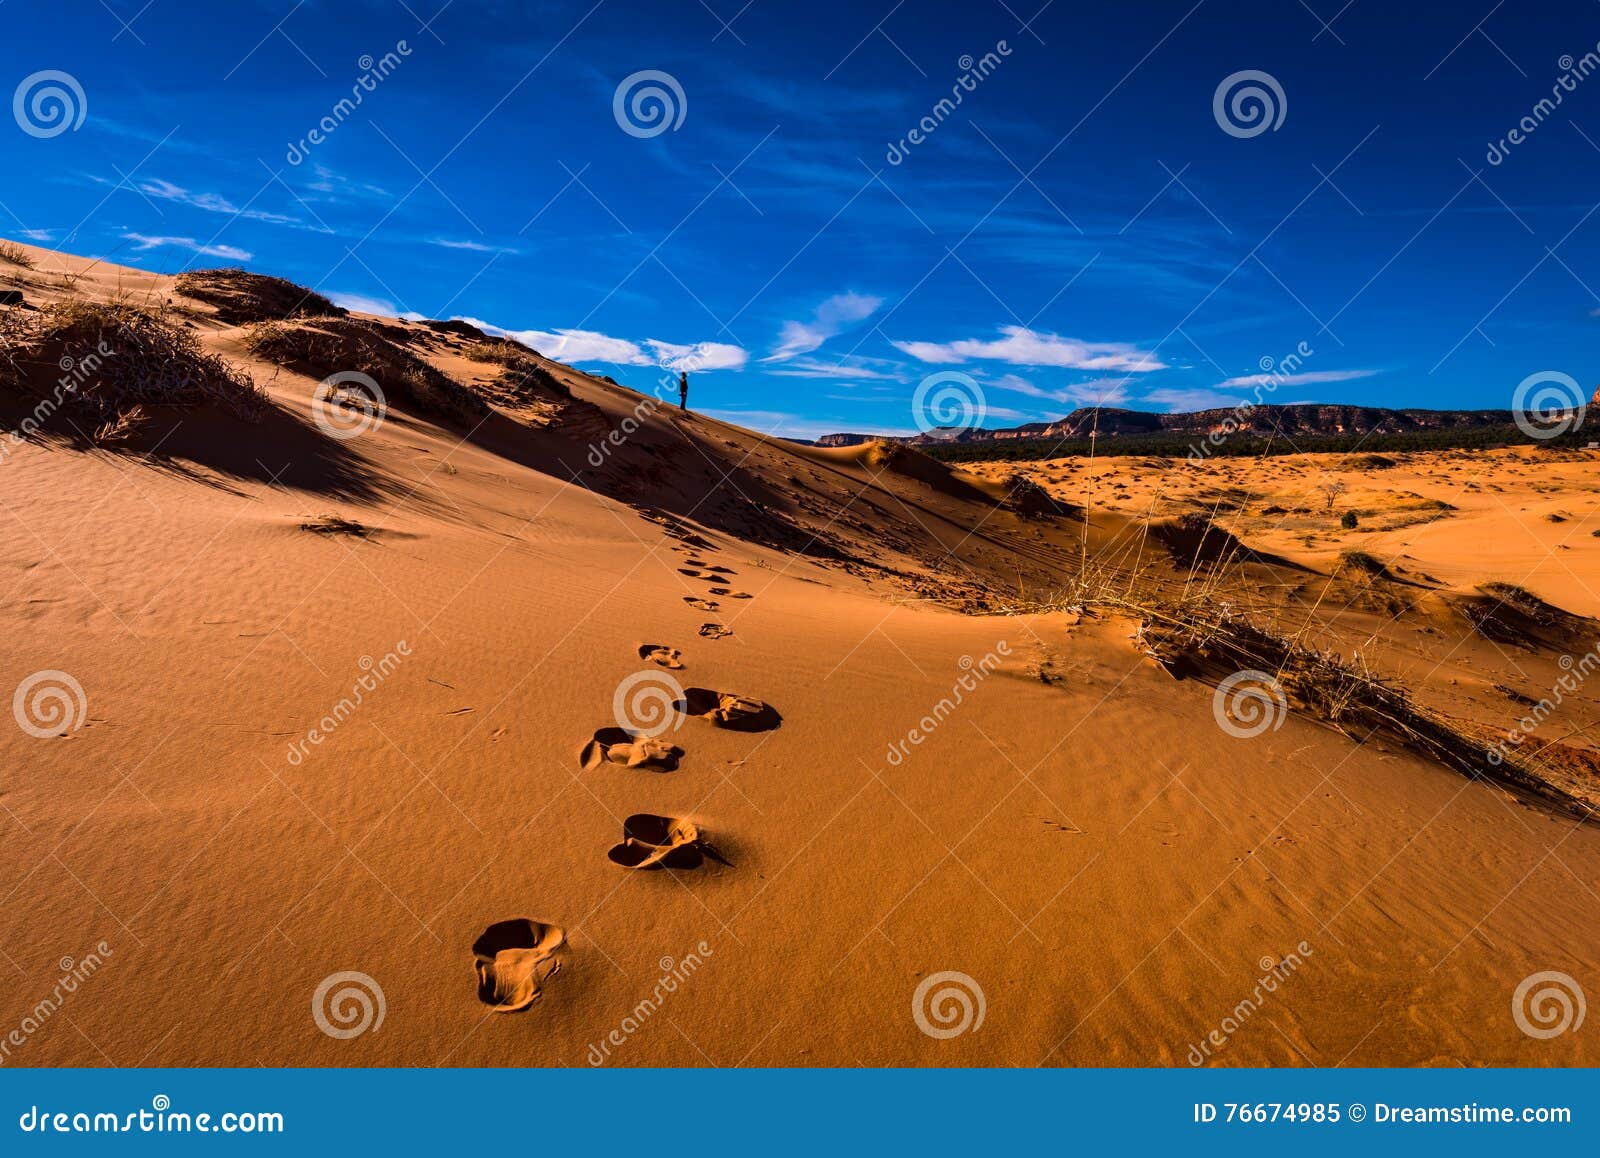 footprints in the sand. alone in the desert